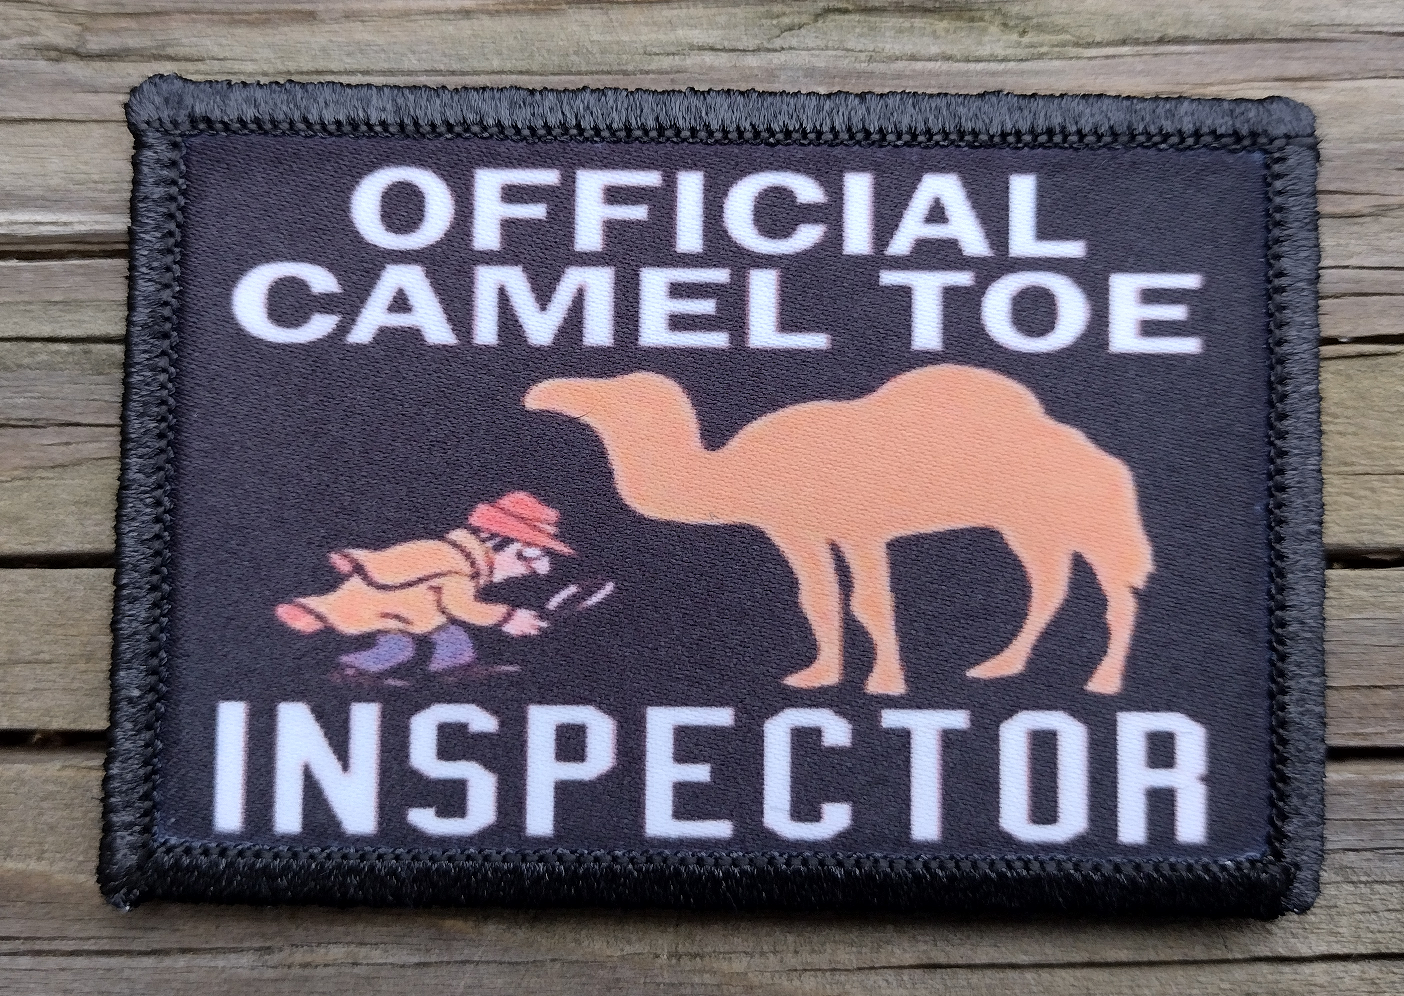 Official Camel Toe Inspector Morale Patch – Rude Patch